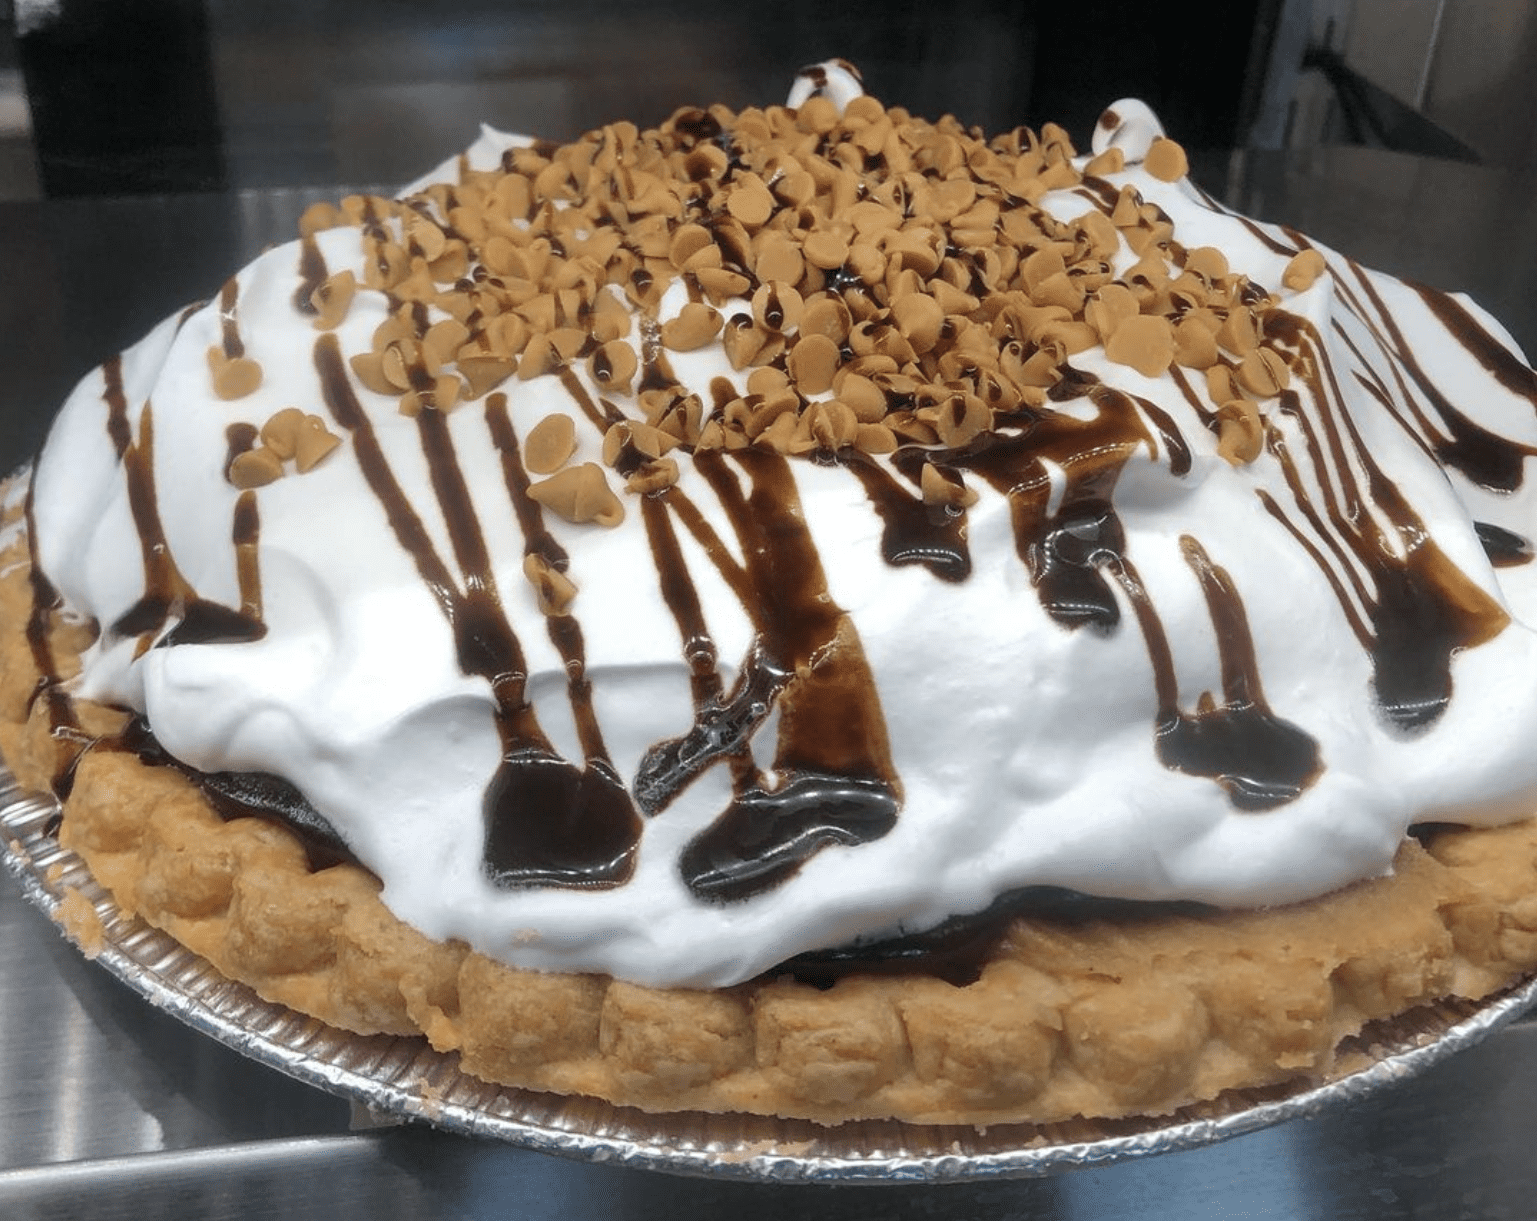 Bumdoodlers Peanutbutter Chocolate Pie